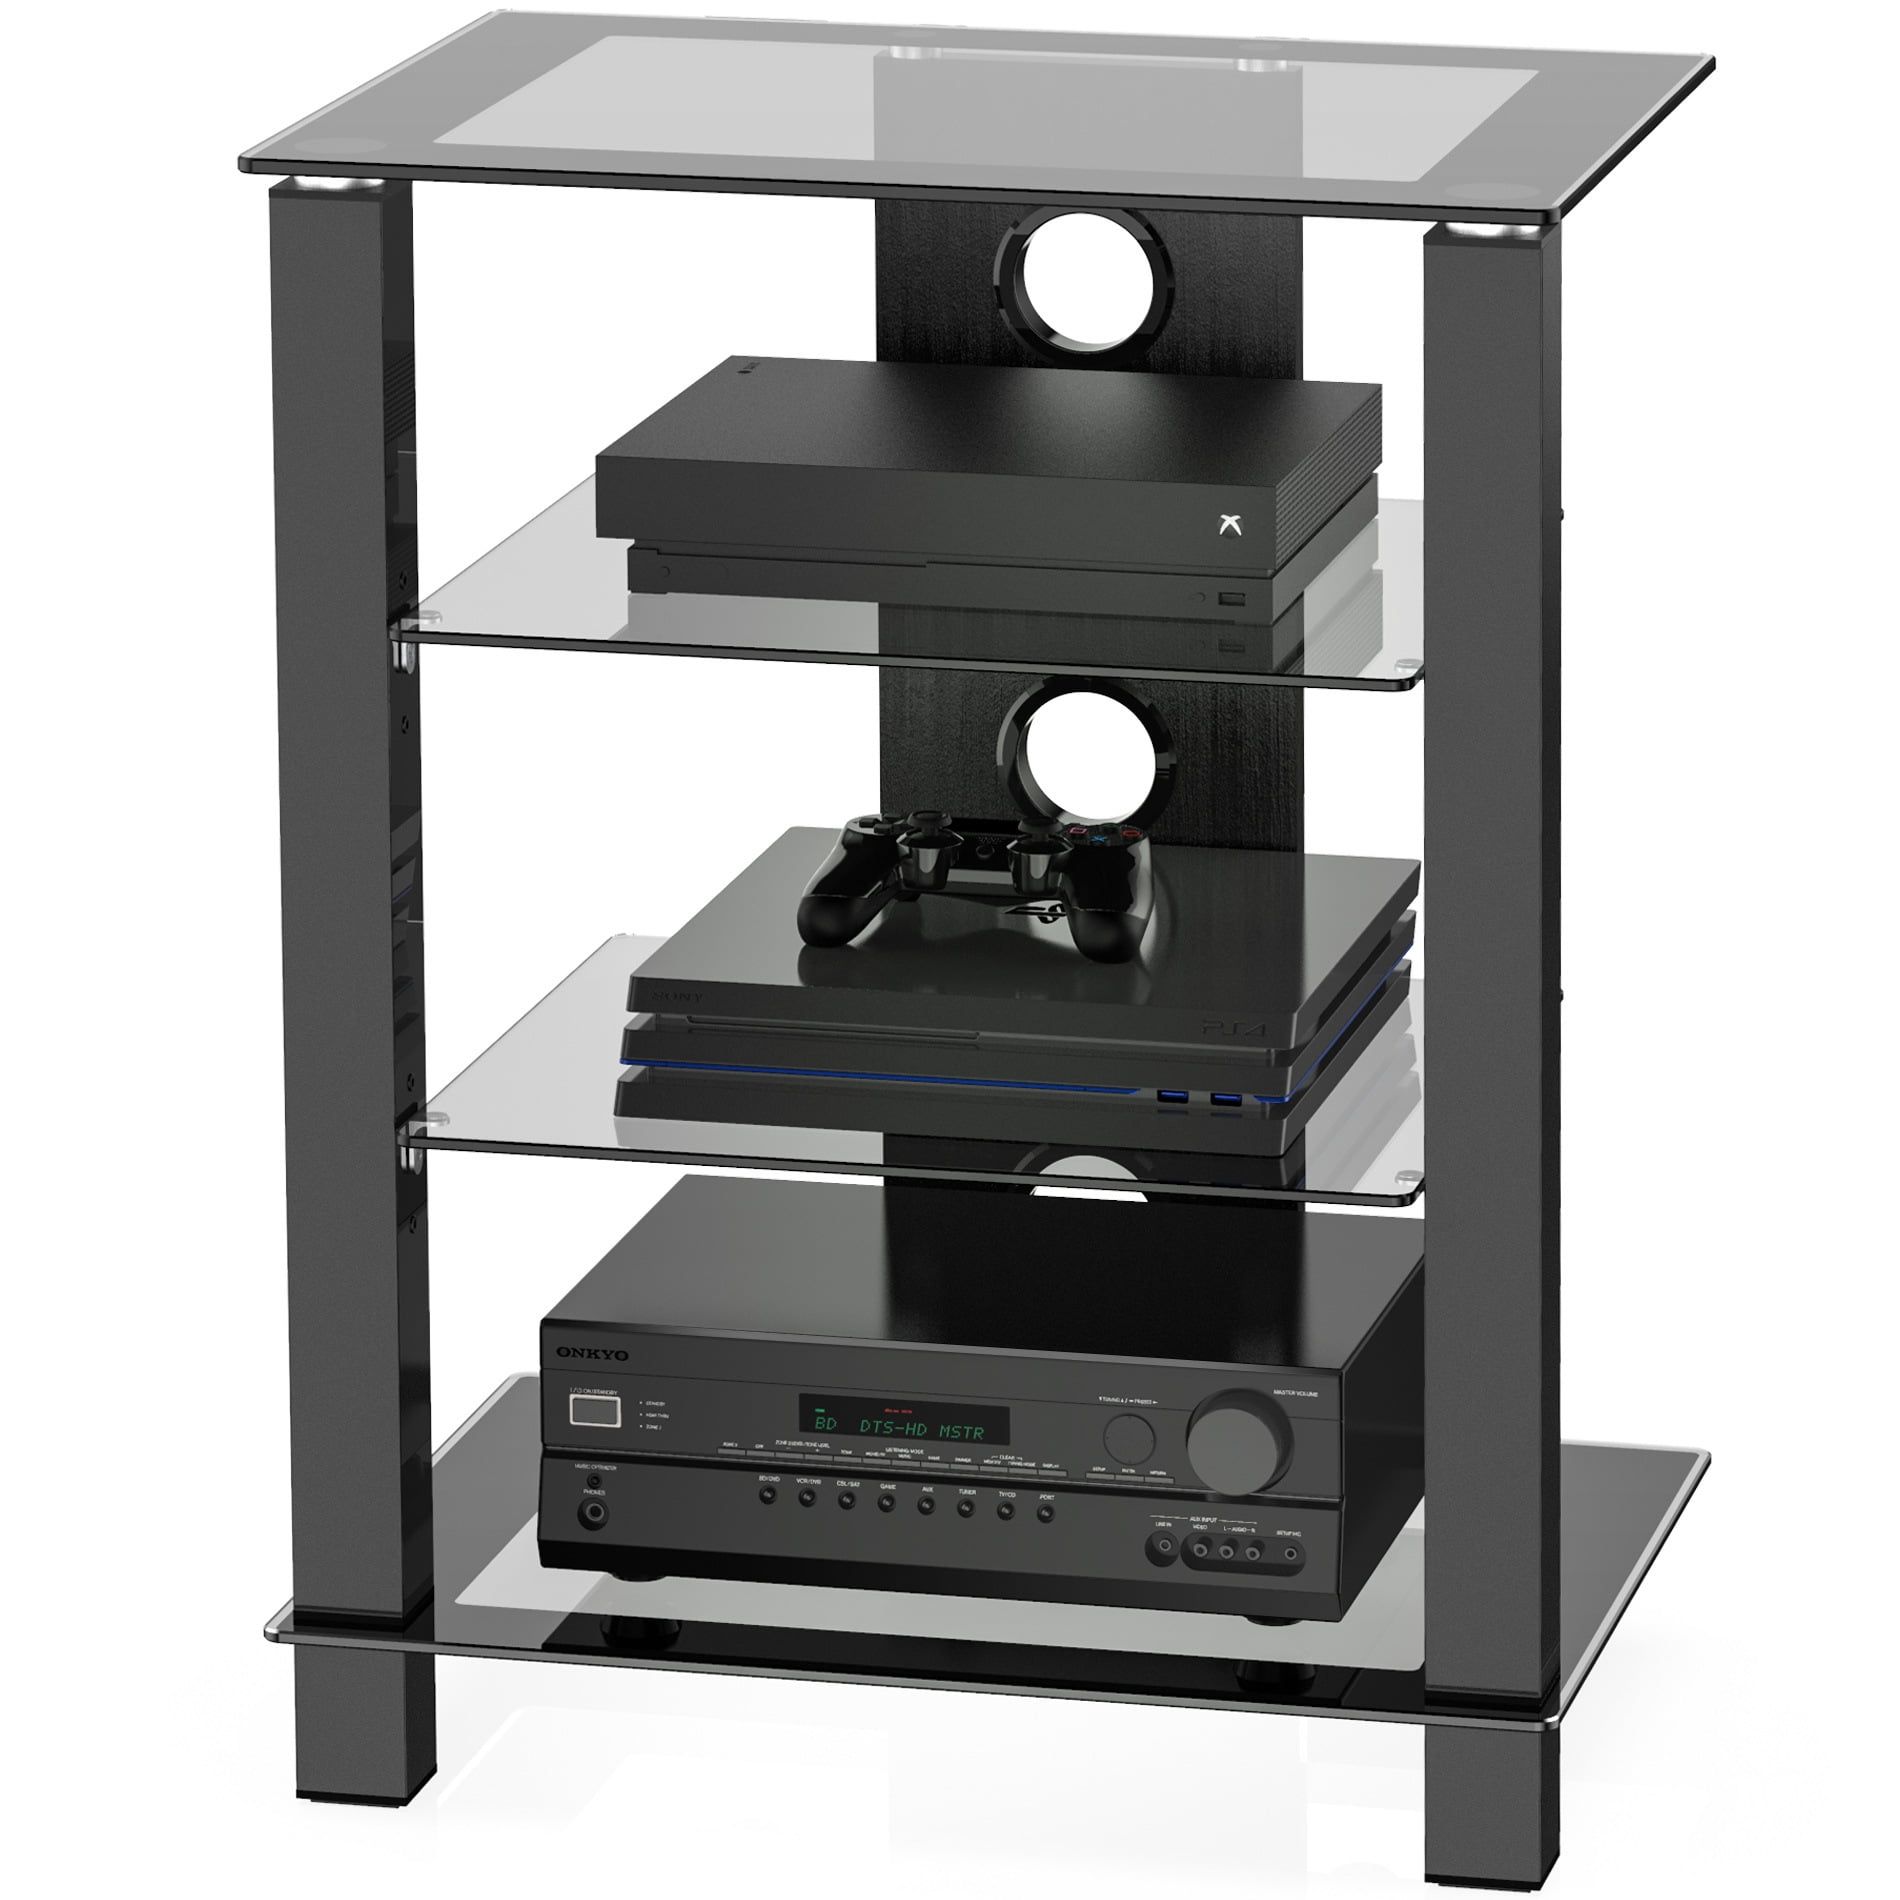 Fitueyes 4 Tier Av Media Stand Component Cabinet And Hi Fi Rack Audio Regarding Tier Stand Console Cabinets (Gallery 6 of 20)